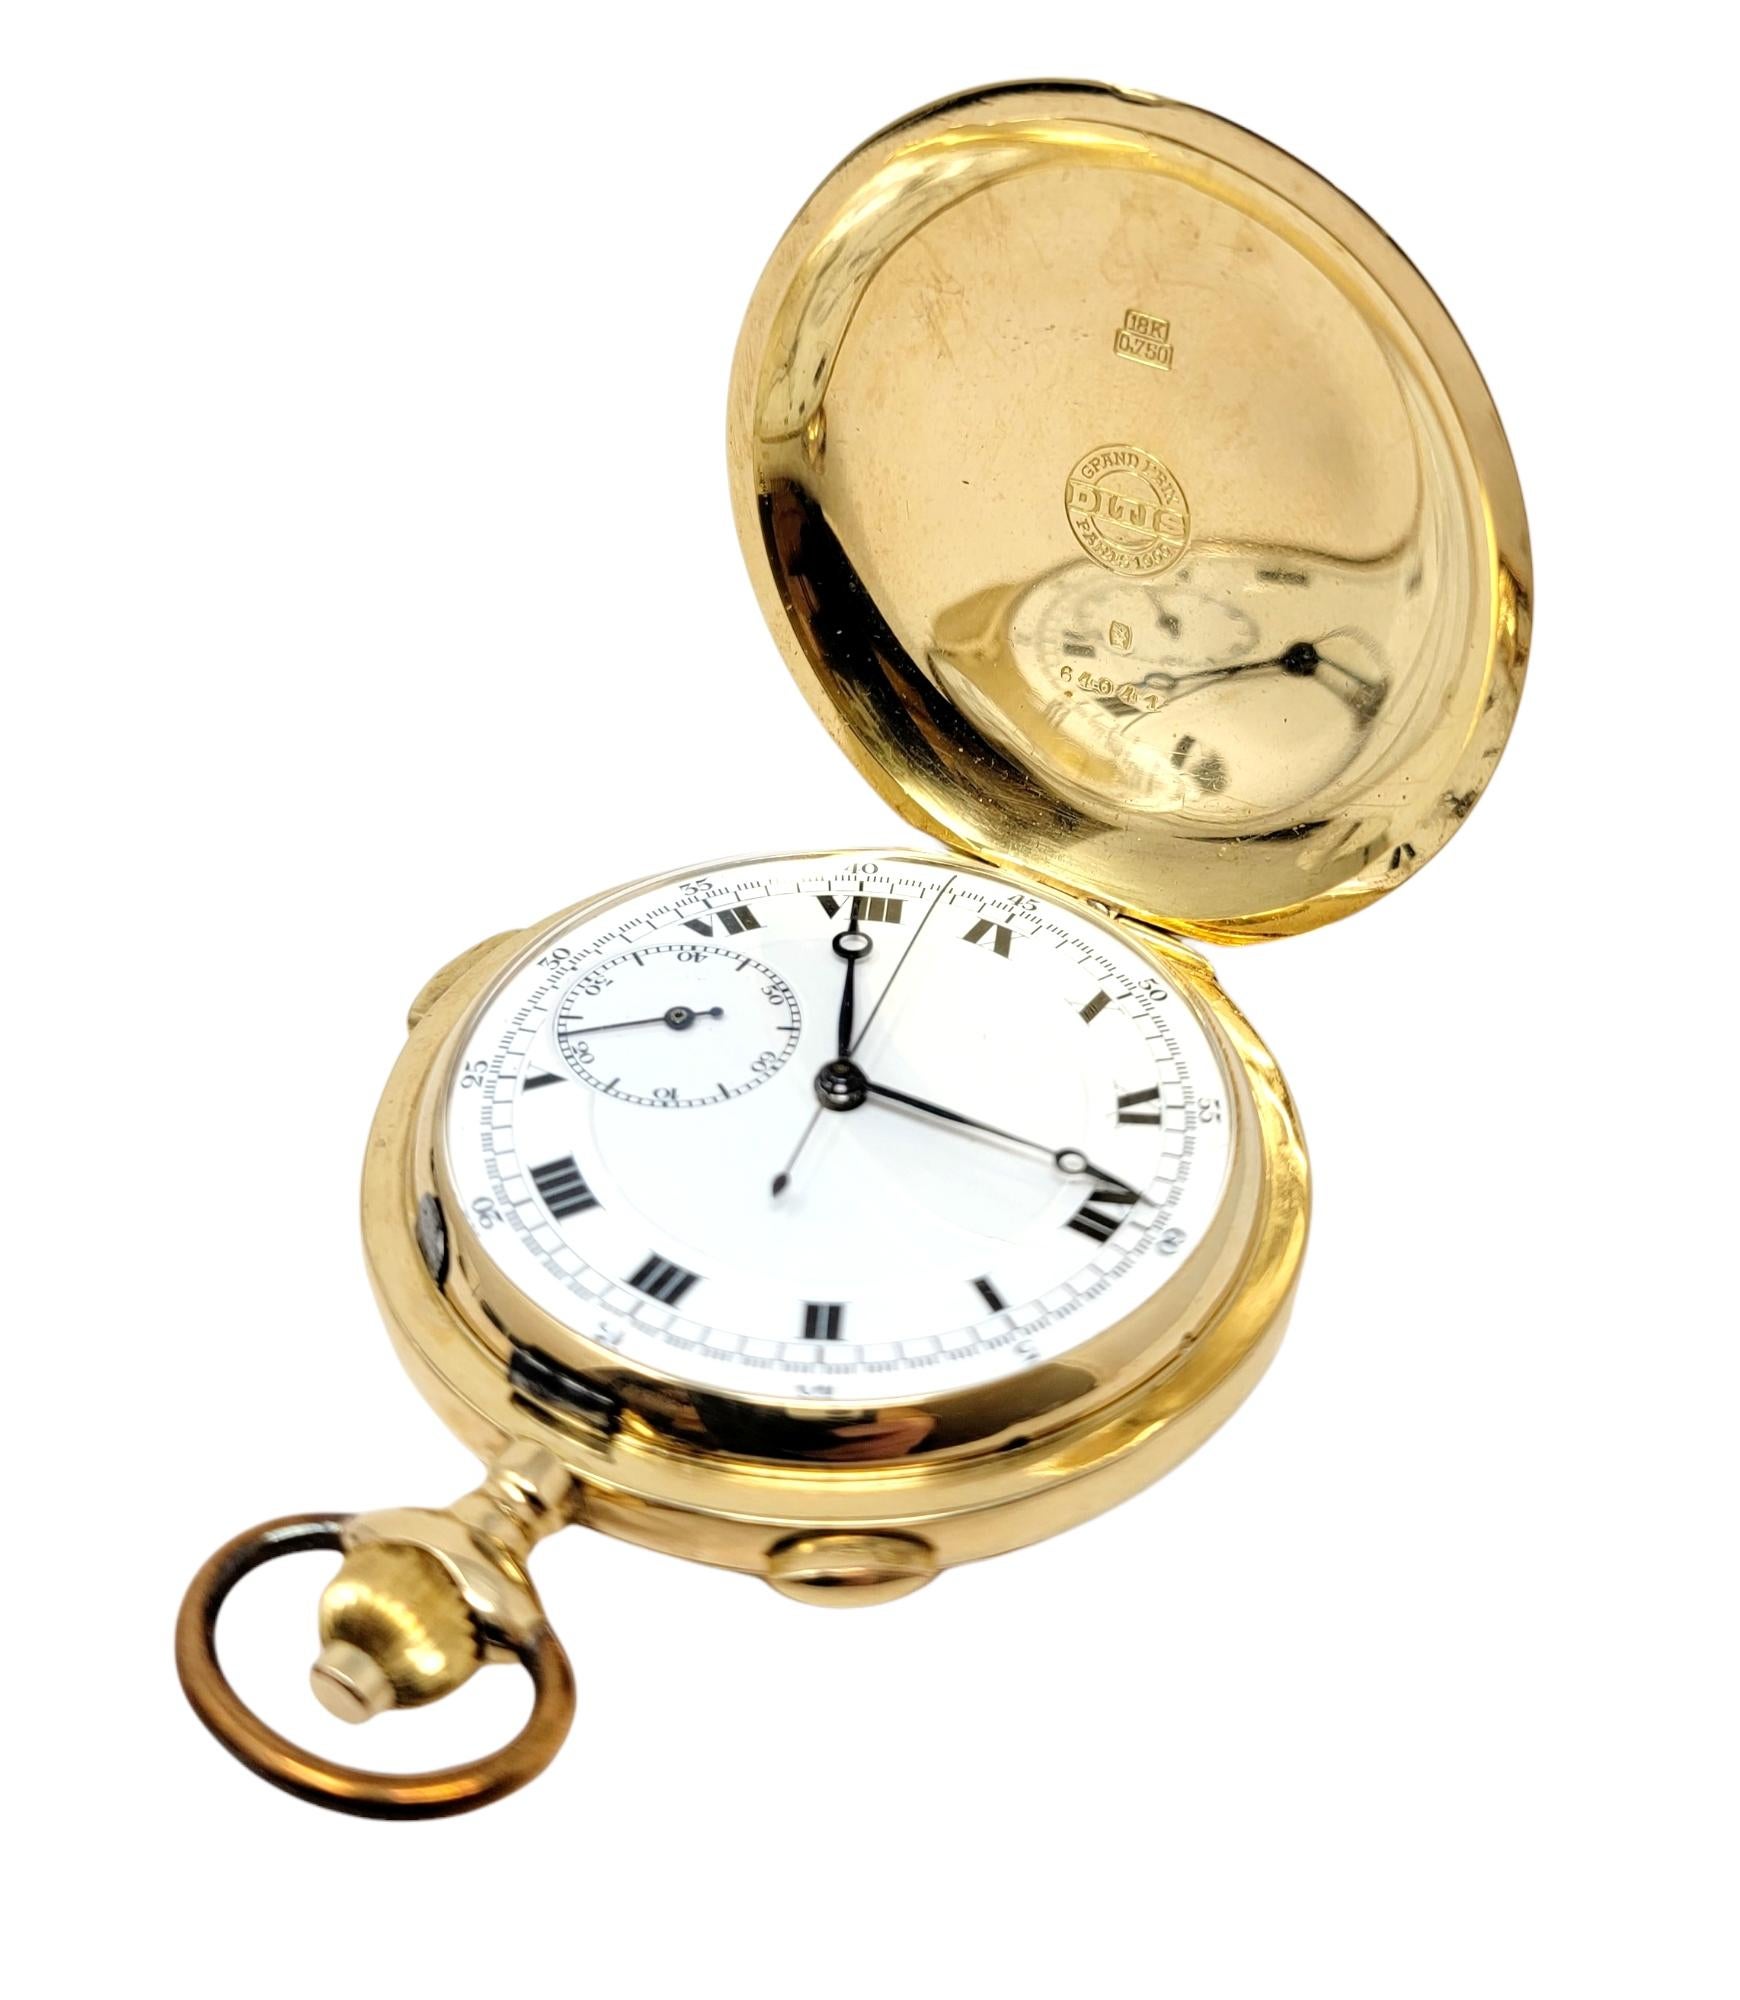 This rare vintage 18 karat yellow gold pocket watch by Paul Ditisheim is a stunning piece of history. The luxury solid gold timepiece is made with exquisite fine details. It features a 46mm case with a white face, black Roman Numeral hour markers